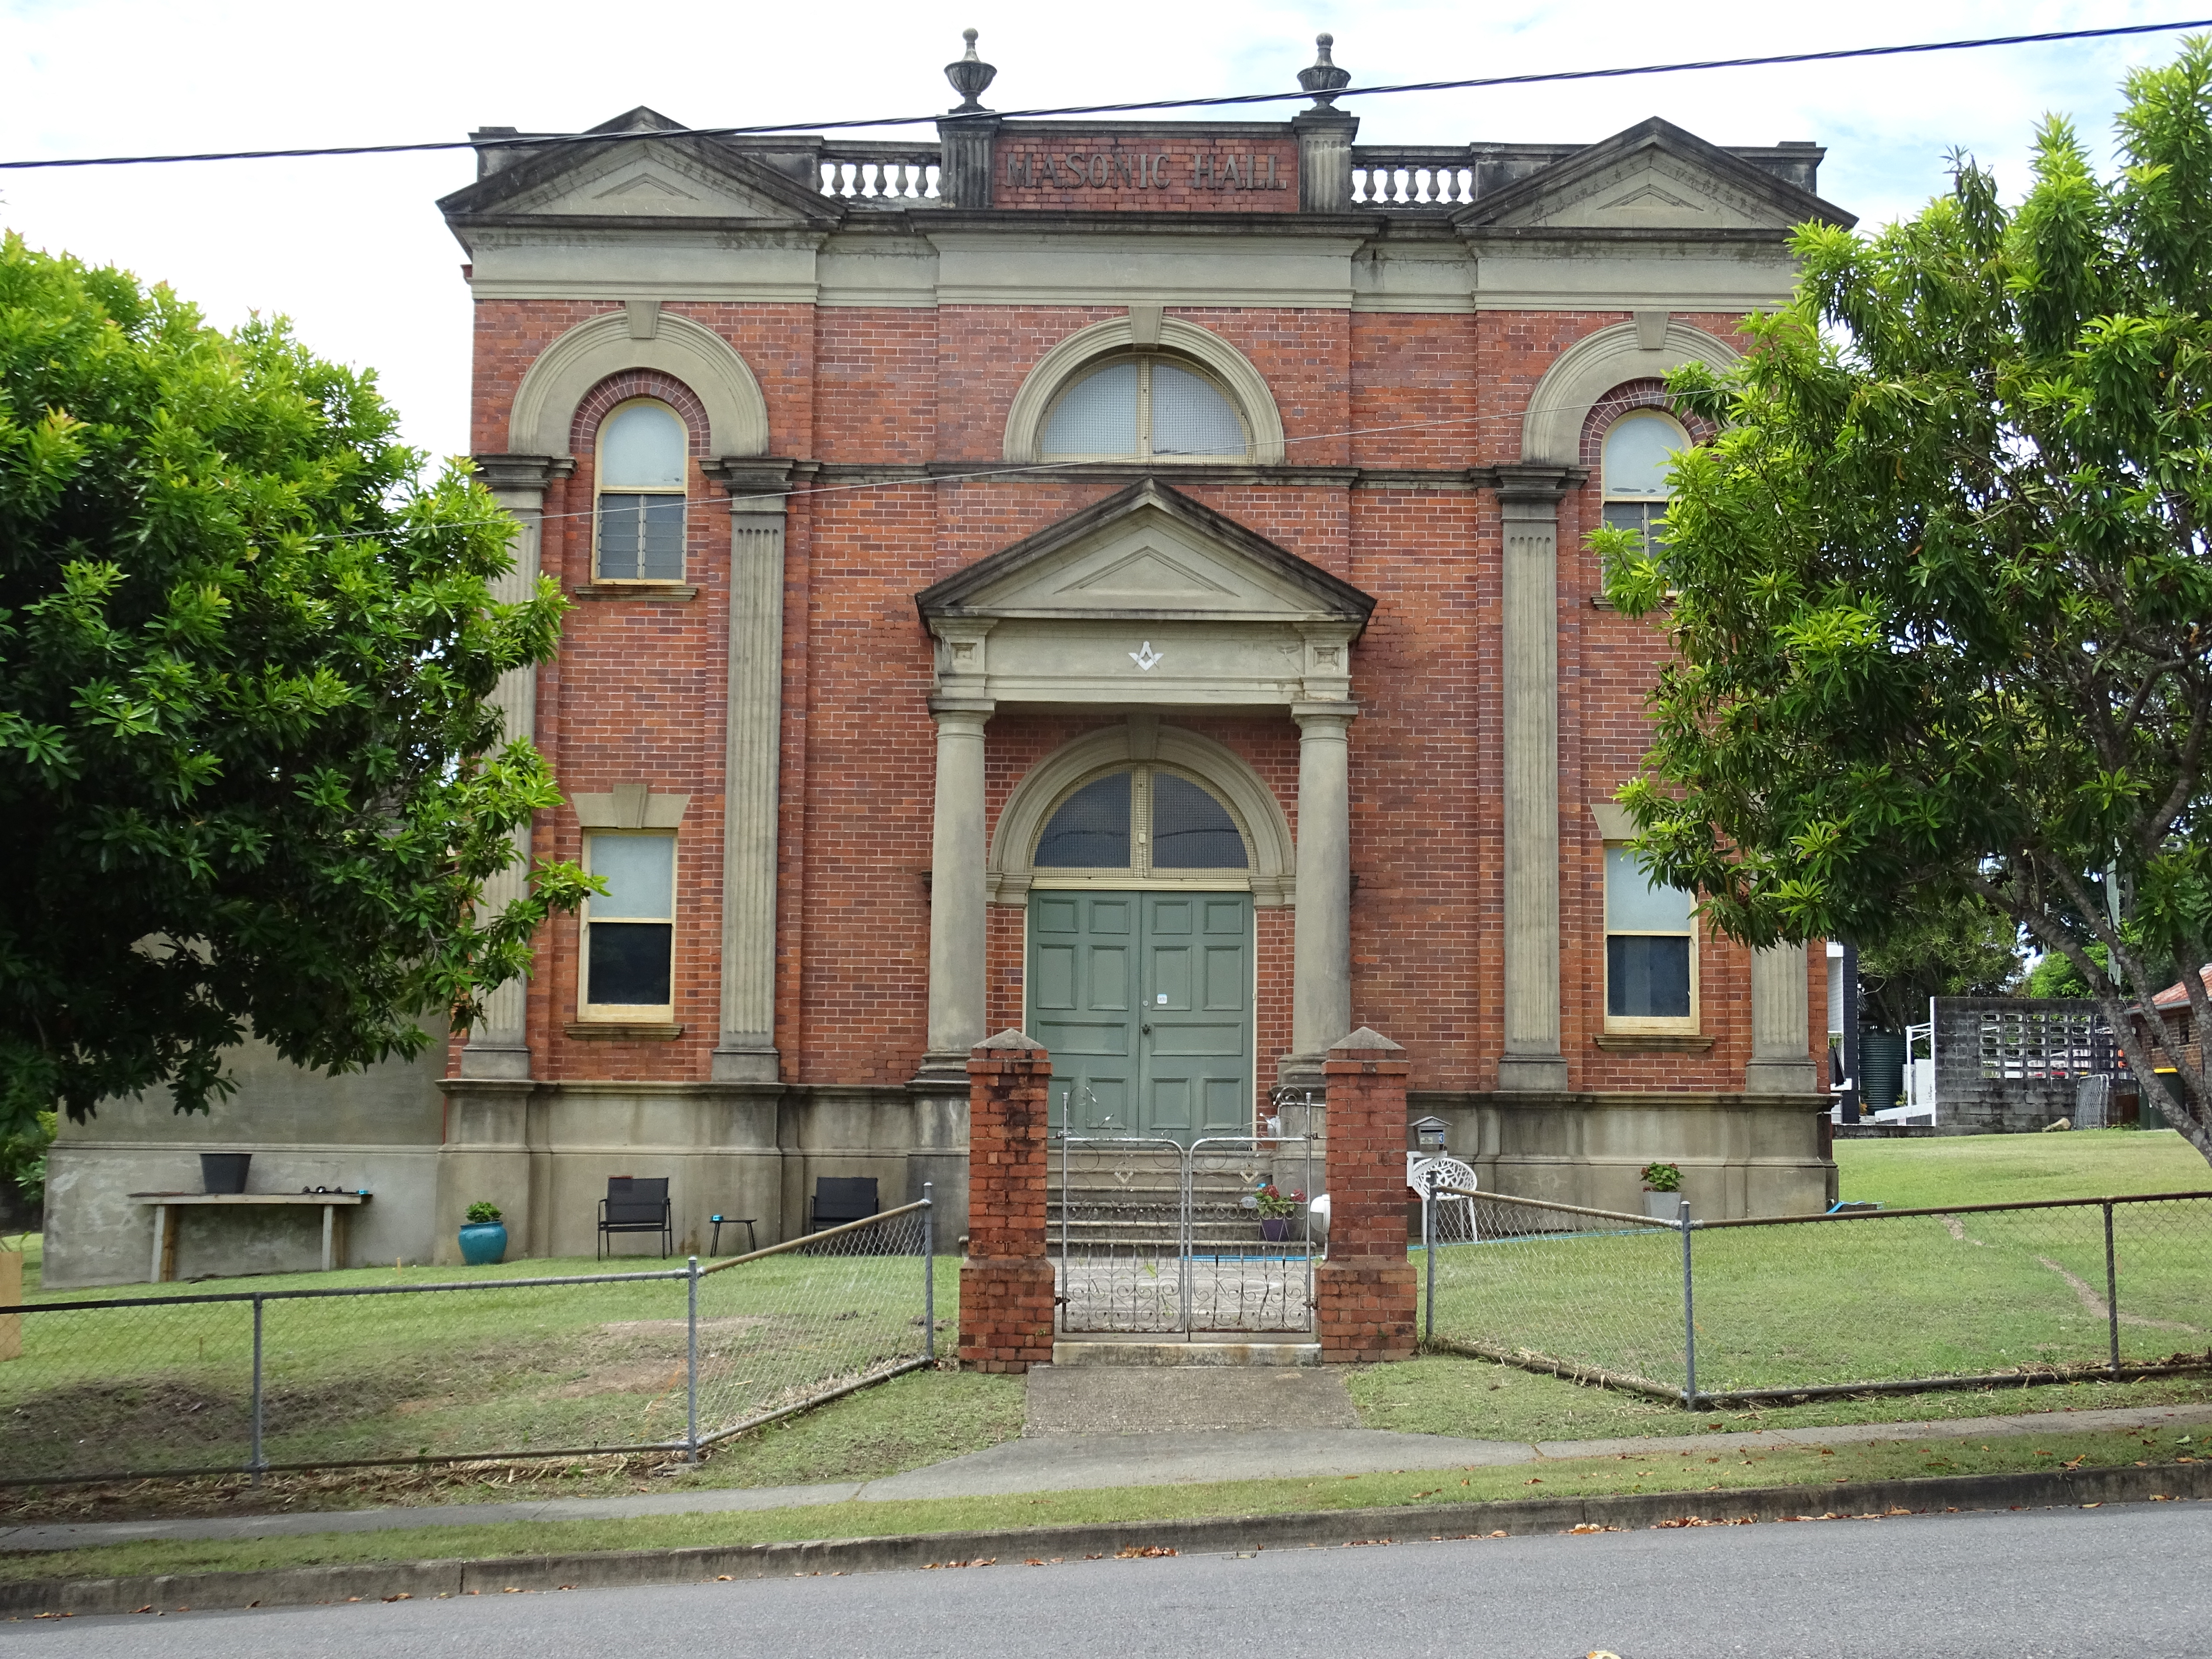 This is an image of the local heritage place known as Wynnum Masonic Hall